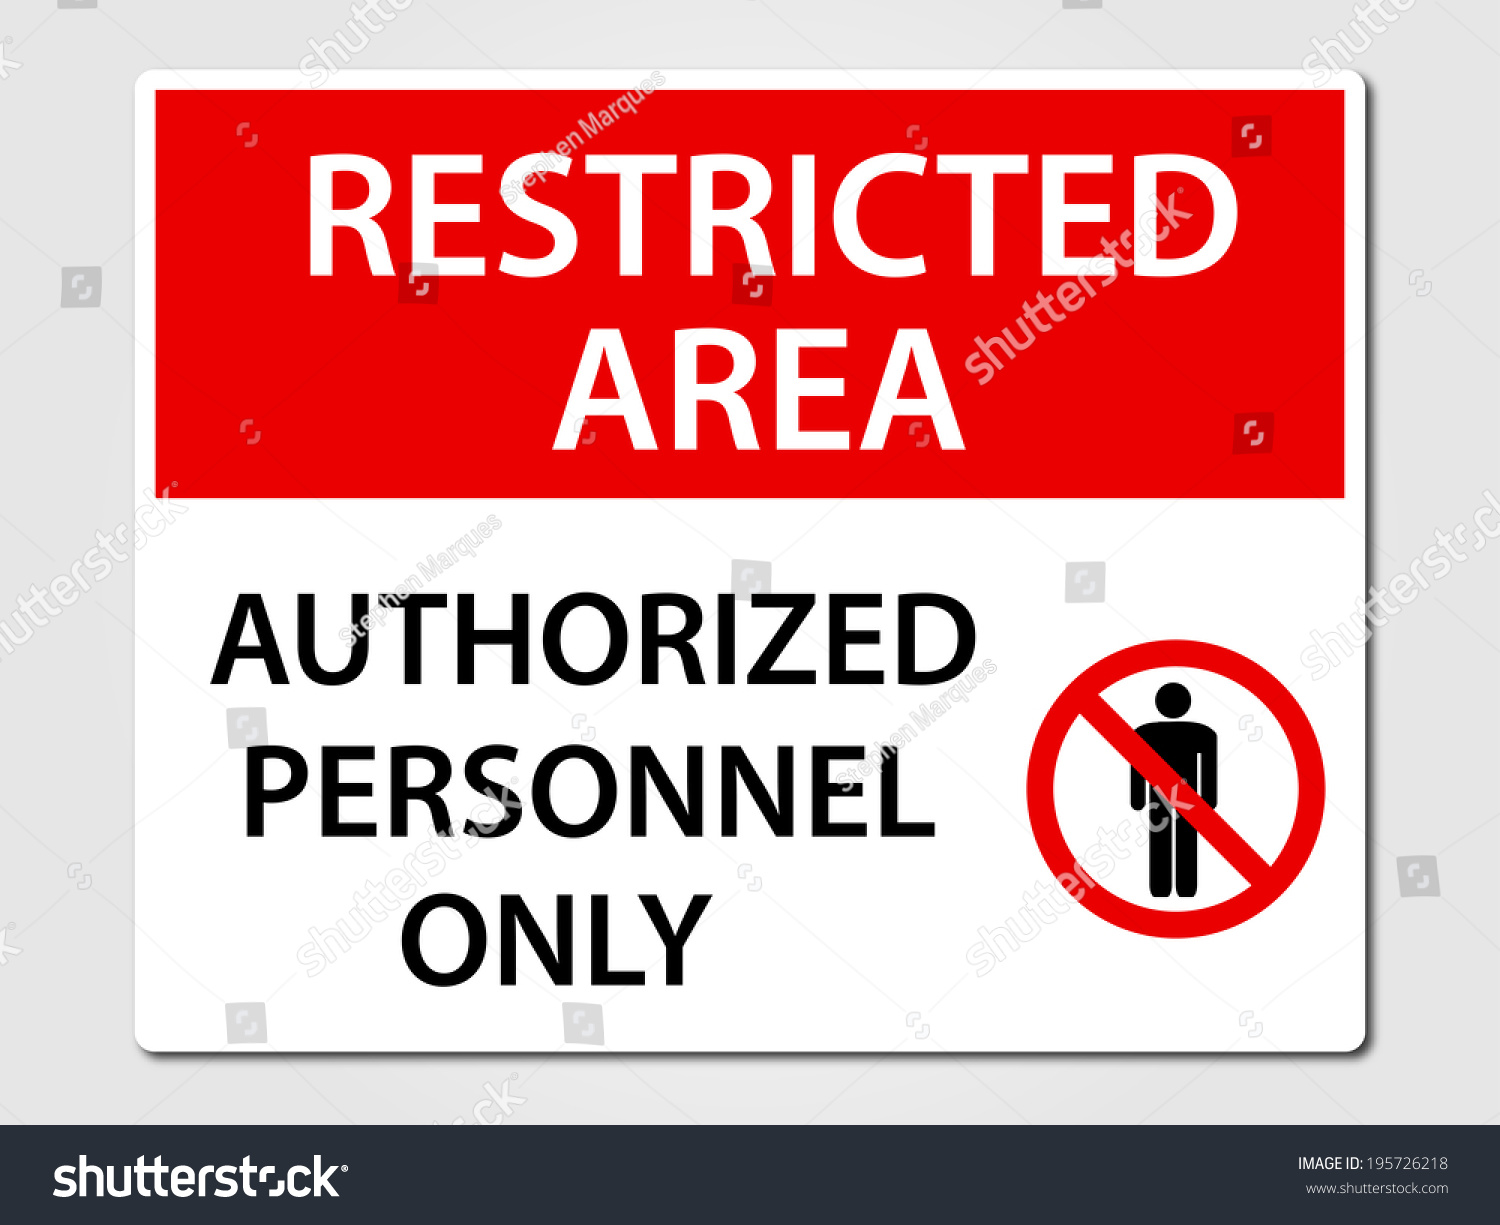 Authorized Personnel Only Security Sign Stock Vector 195726218 ...